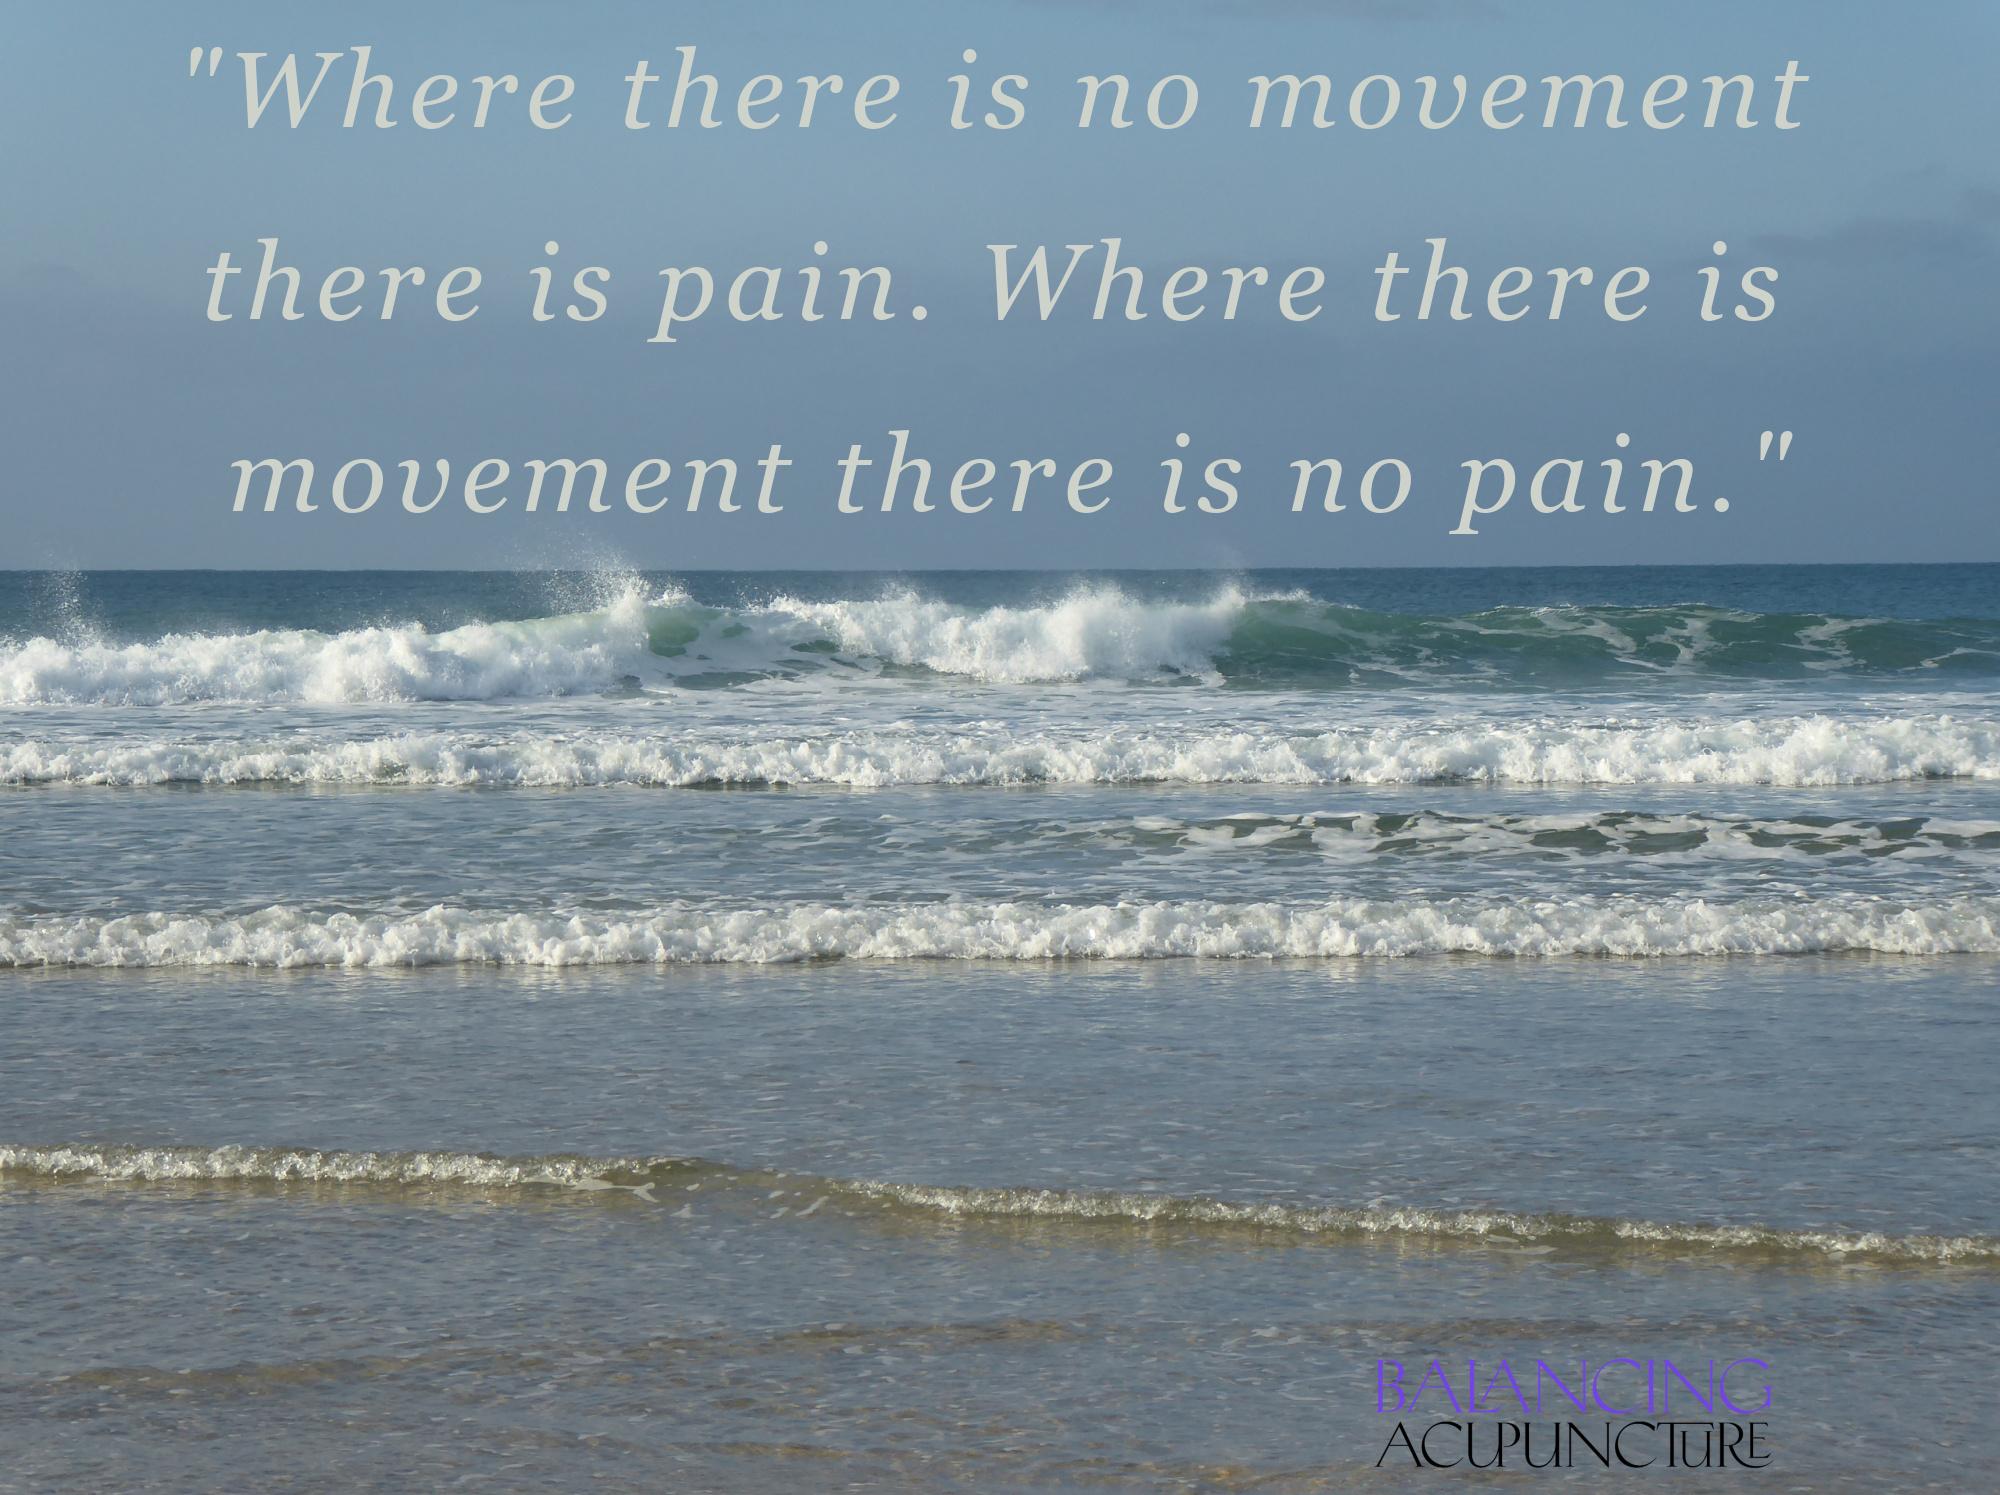 Where there is no movement there is pain where there is movement there is no painjpg